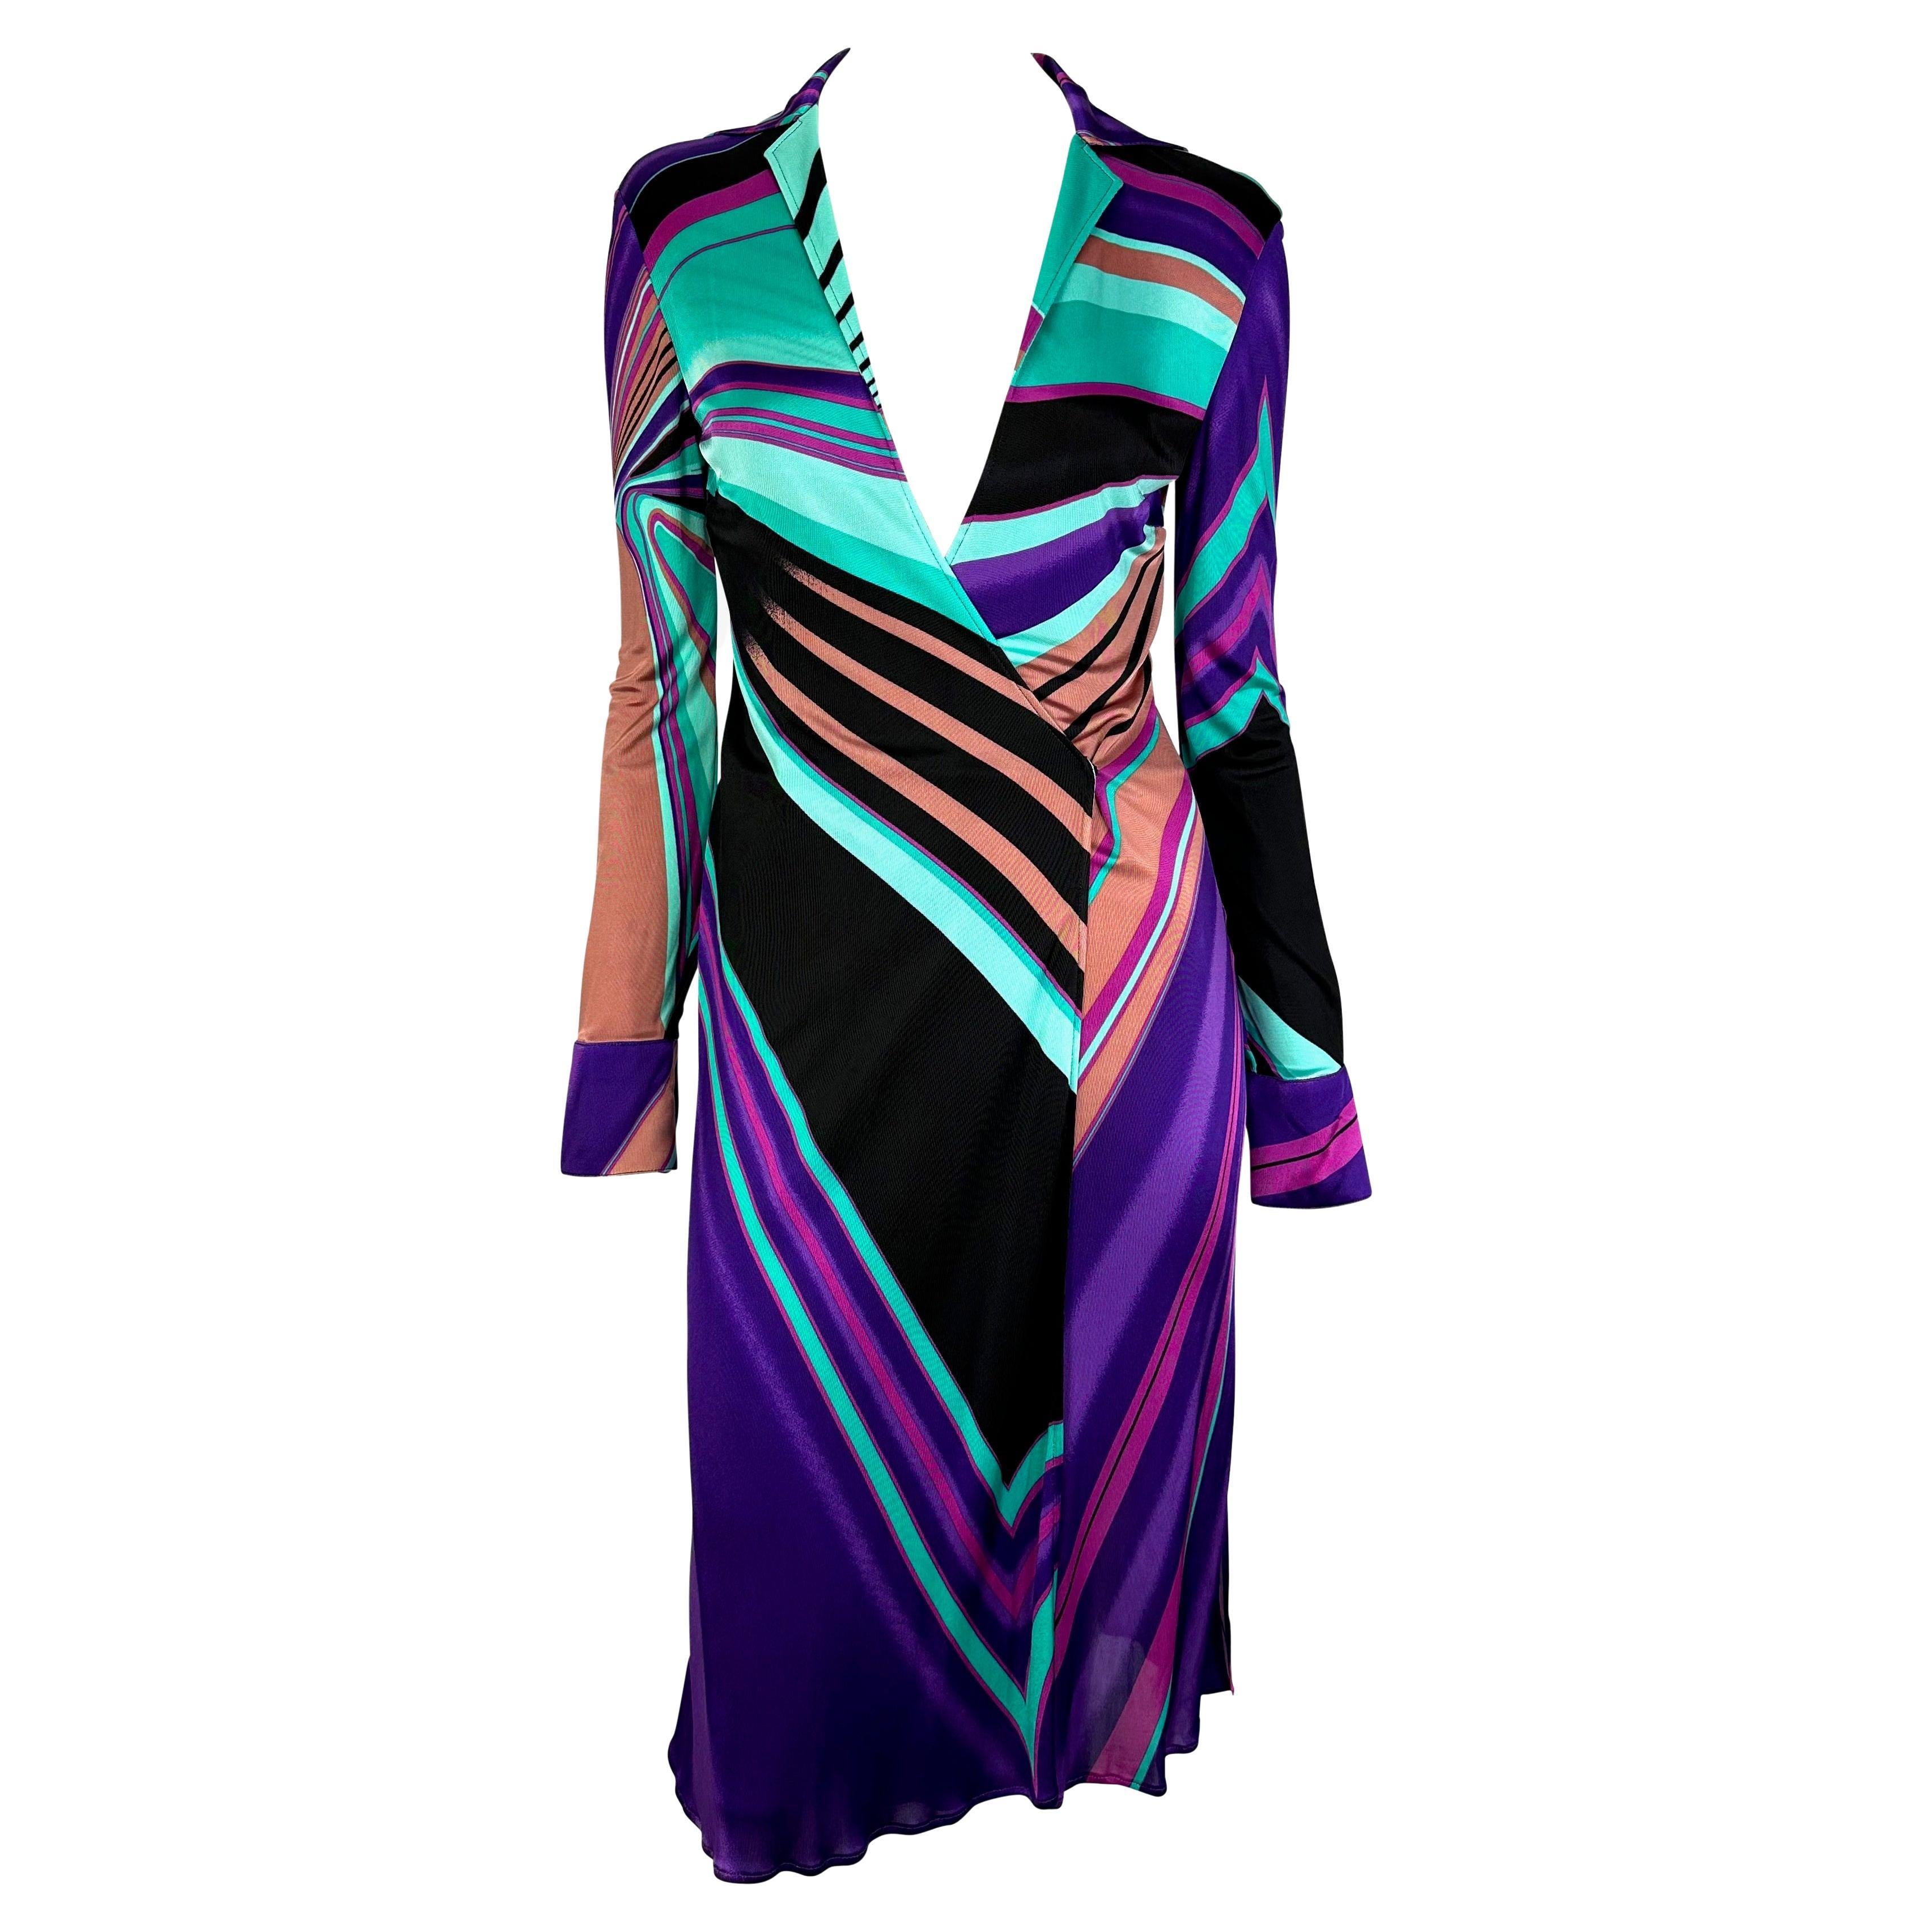 F/W 2000 Gianni Versace by Donatella Multicolor Abstract Plunge Stretch Dress  For Sale